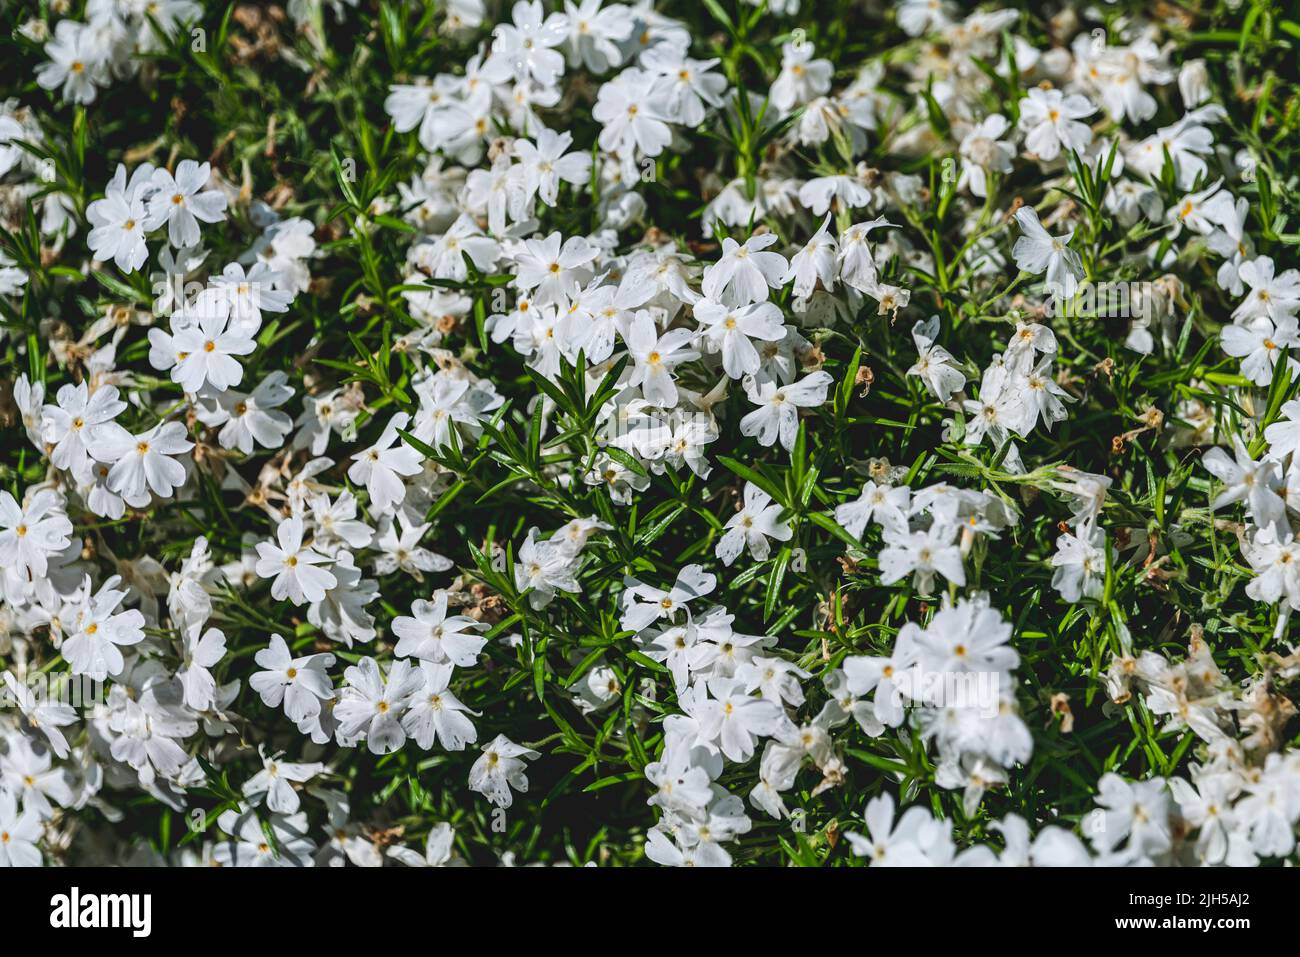 White creeping phlox. Blooming phlox close up web banner. Rockery with small pretty white phlox flowers, nature background. Stock Photo